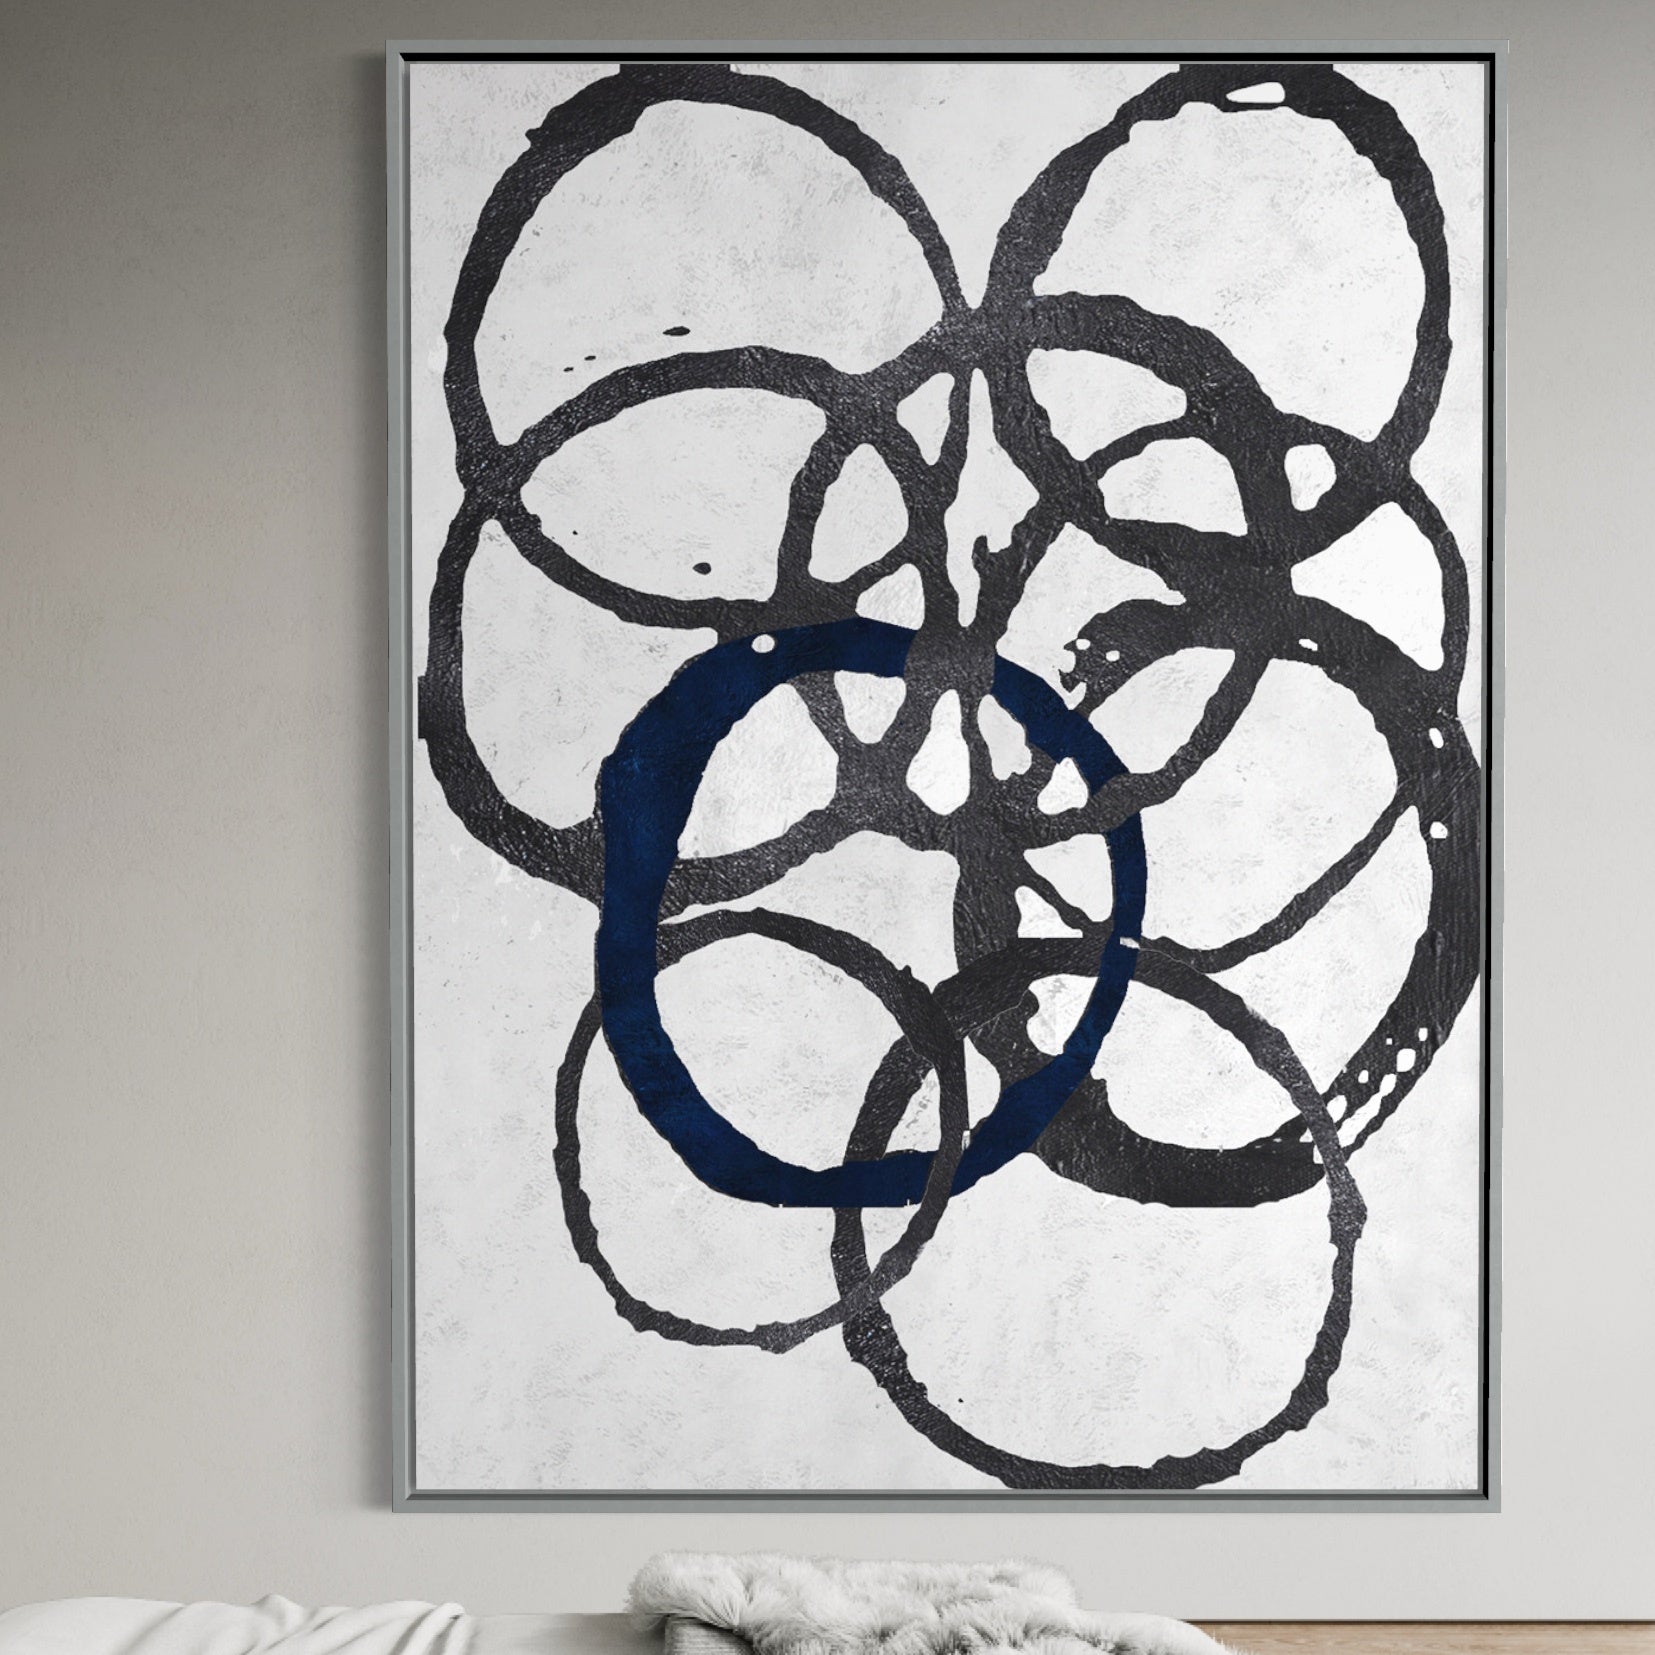 Circles And Charcoal, Wood (Birch) / 120x180cm